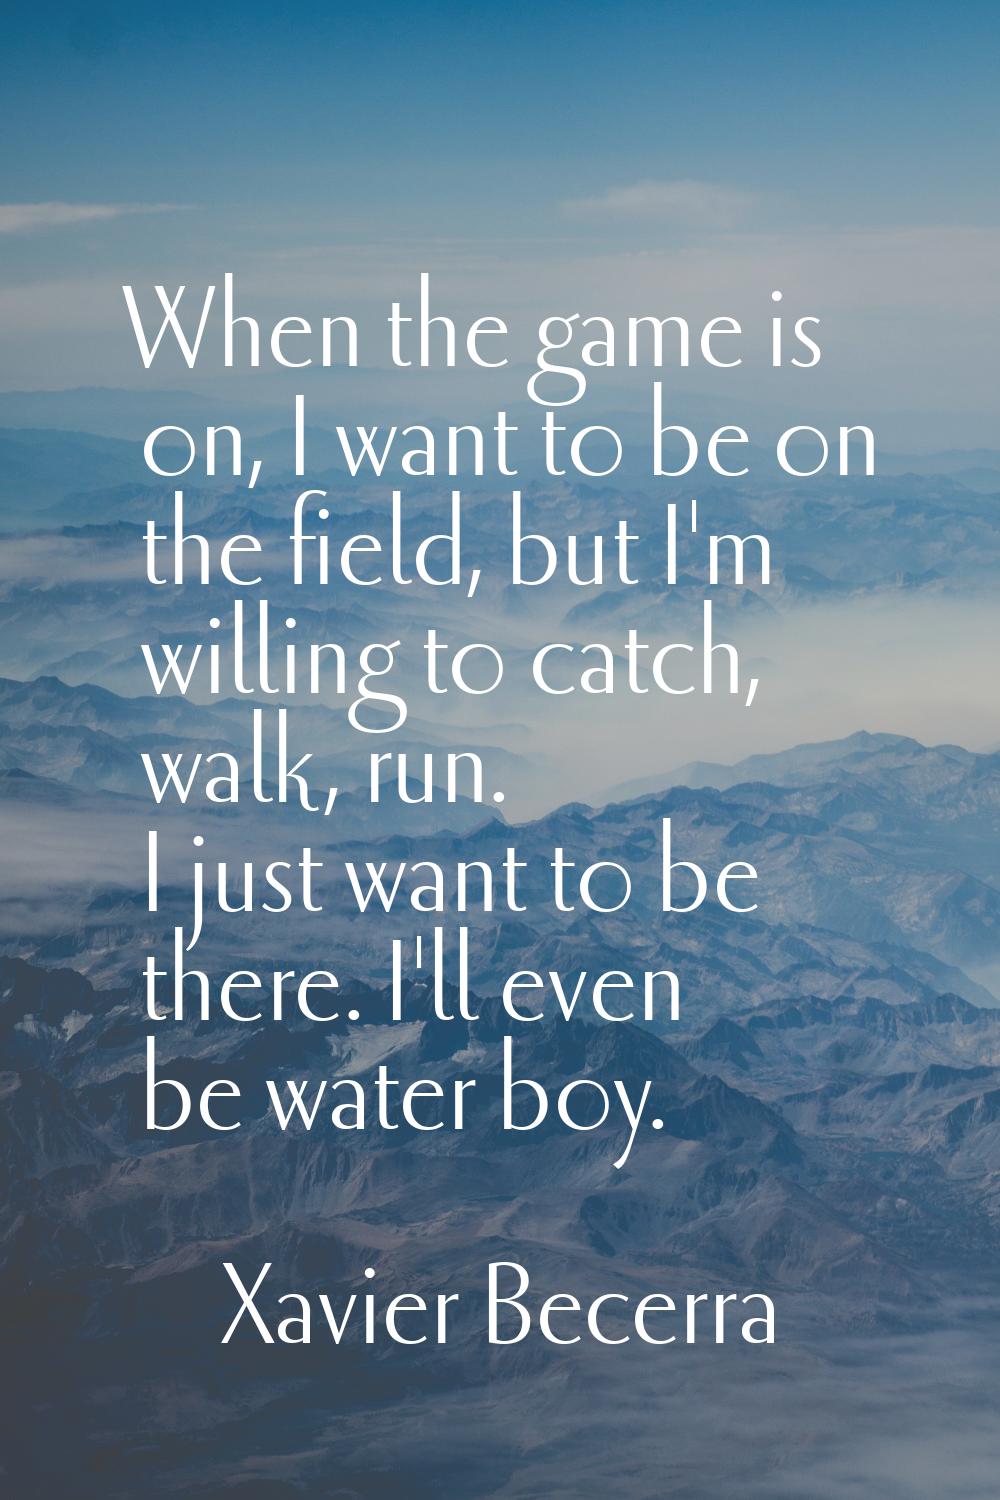 When the game is on, I want to be on the field, but I'm willing to catch, walk, run. I just want to